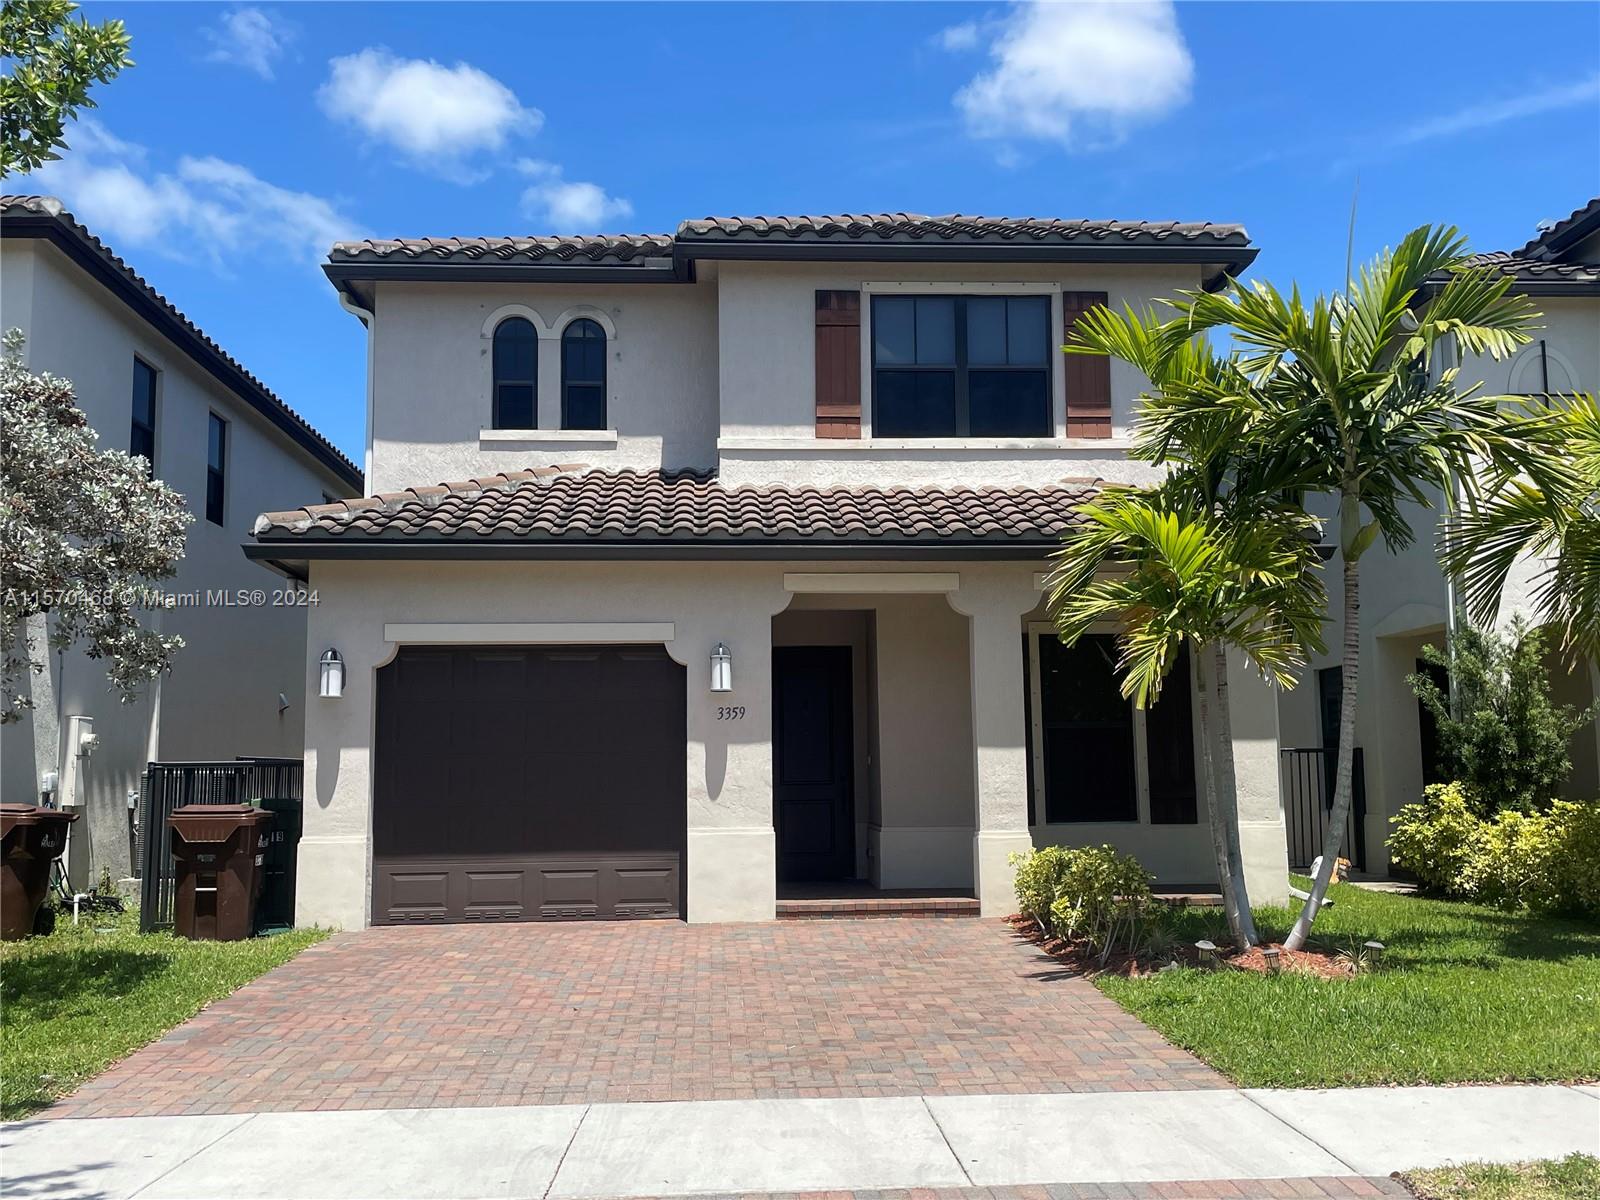 3359 W 97th Ter, Hialeah, Florida 33018, 4 Bedrooms Bedrooms, ,3 BathroomsBathrooms,Residential,For Sale,3359 W 97th Ter,A11570468